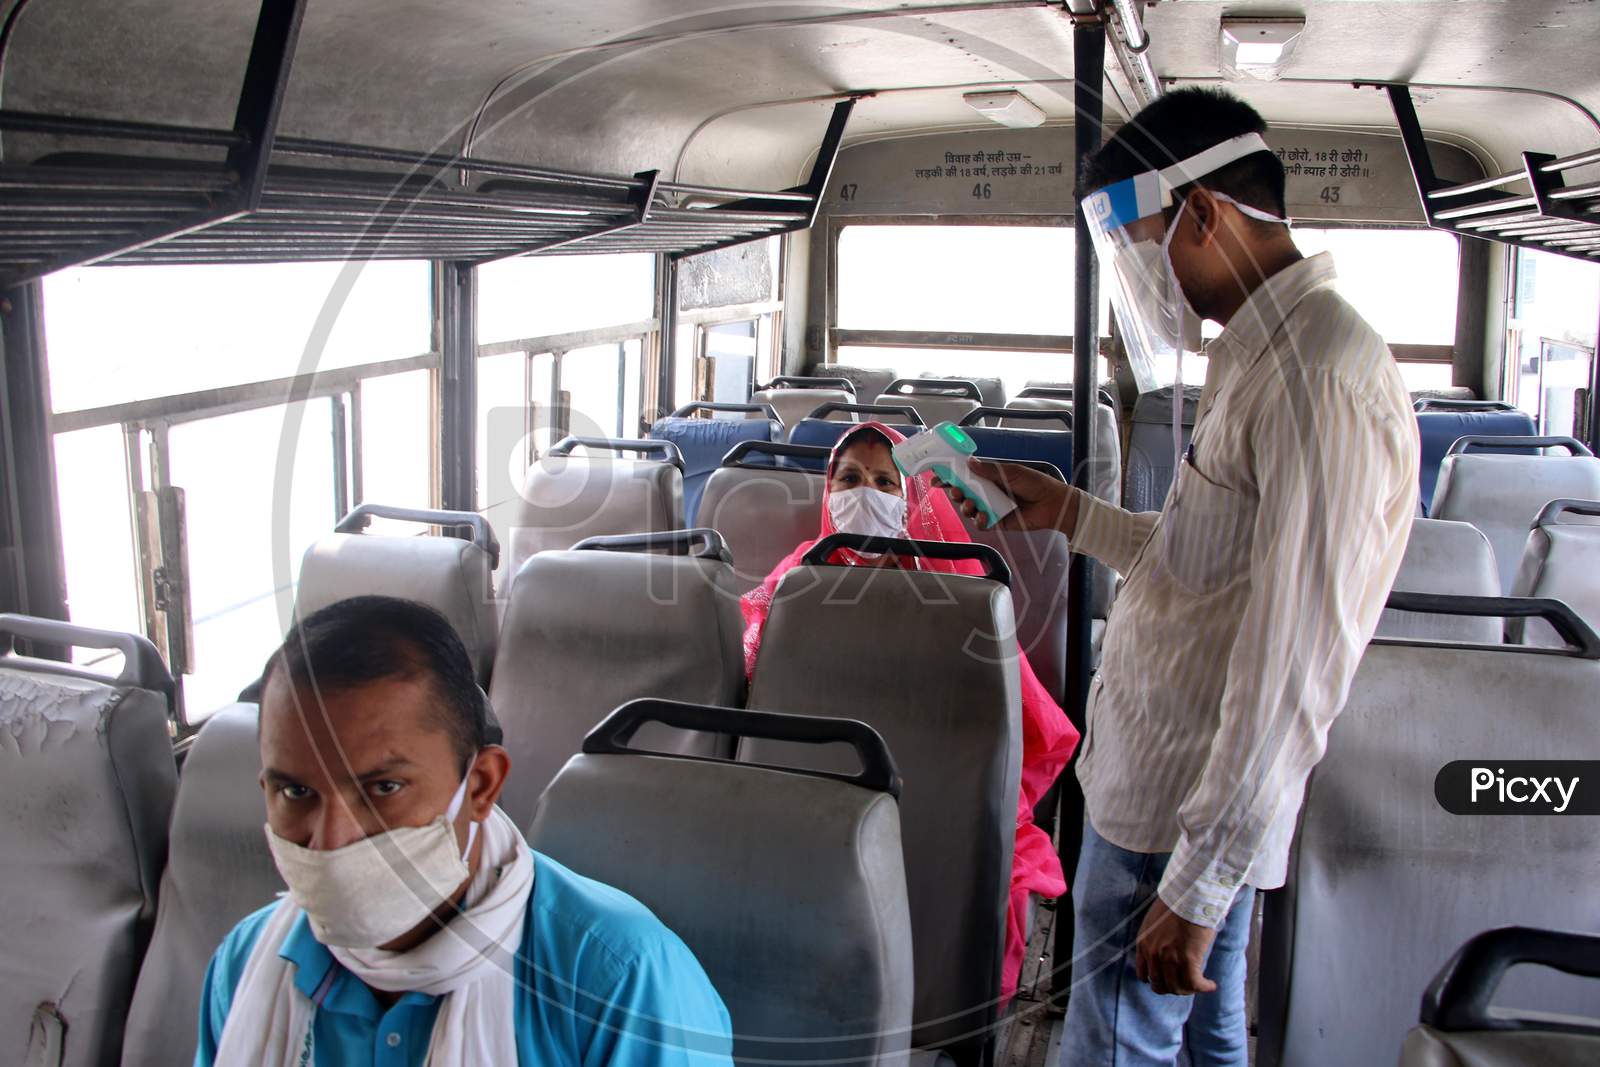 Passengers Undergo Thermal Screening As They Board A Public Bus Following Ease Of Restrictions, During The Fifth Phase Of Covid-19 Lockdown In Ajmer, Rajasthan, India On 03 June 2020.